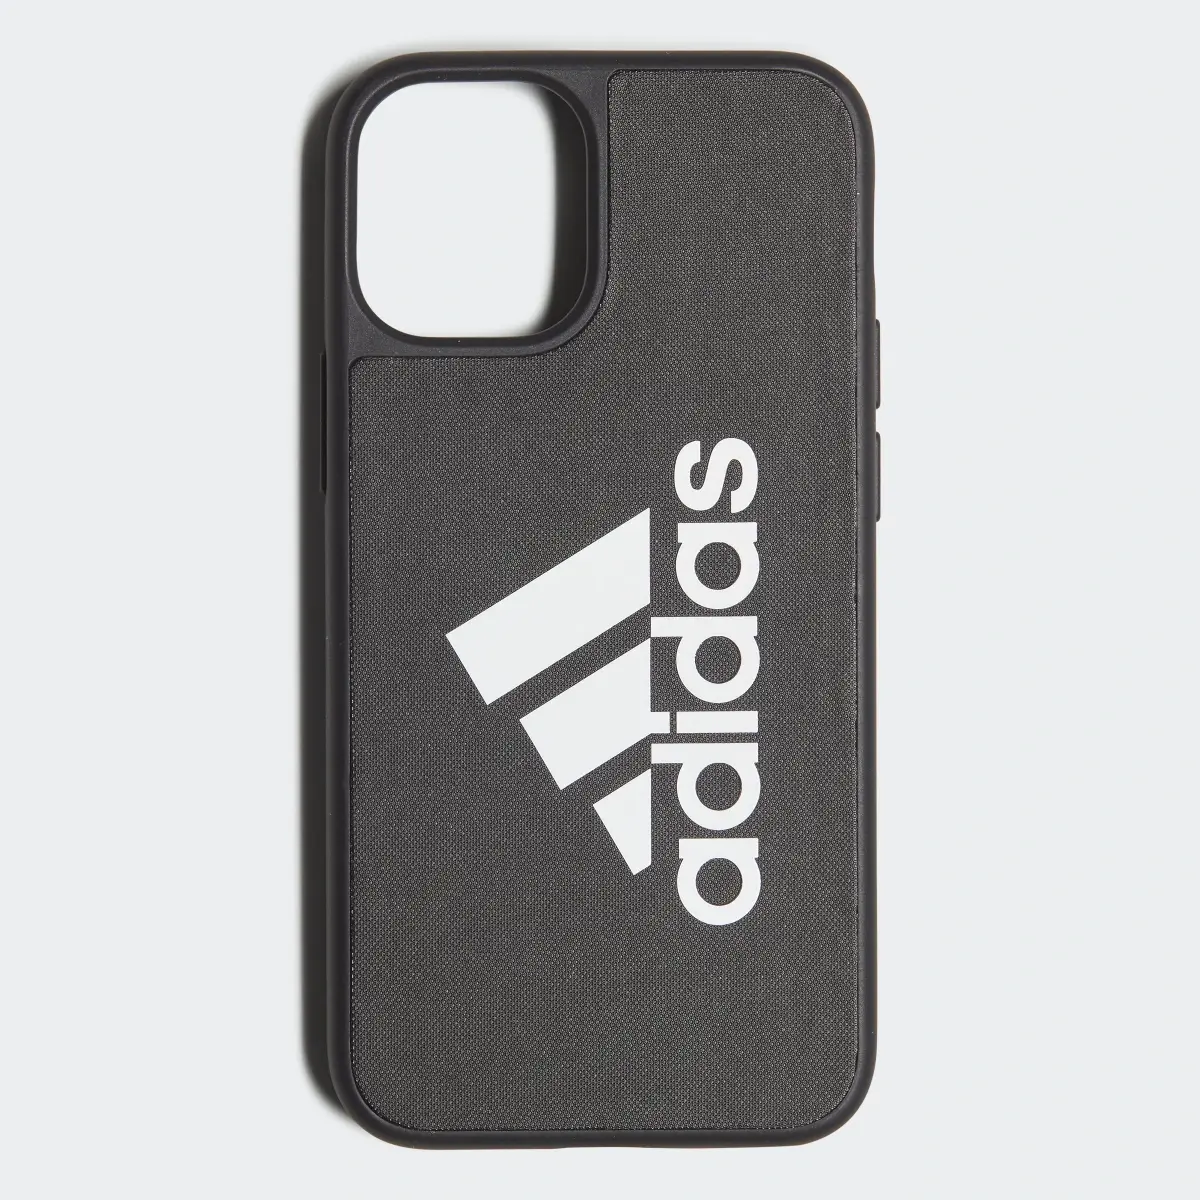 Adidas Iconic Sports for iPhone 12 mini. 2